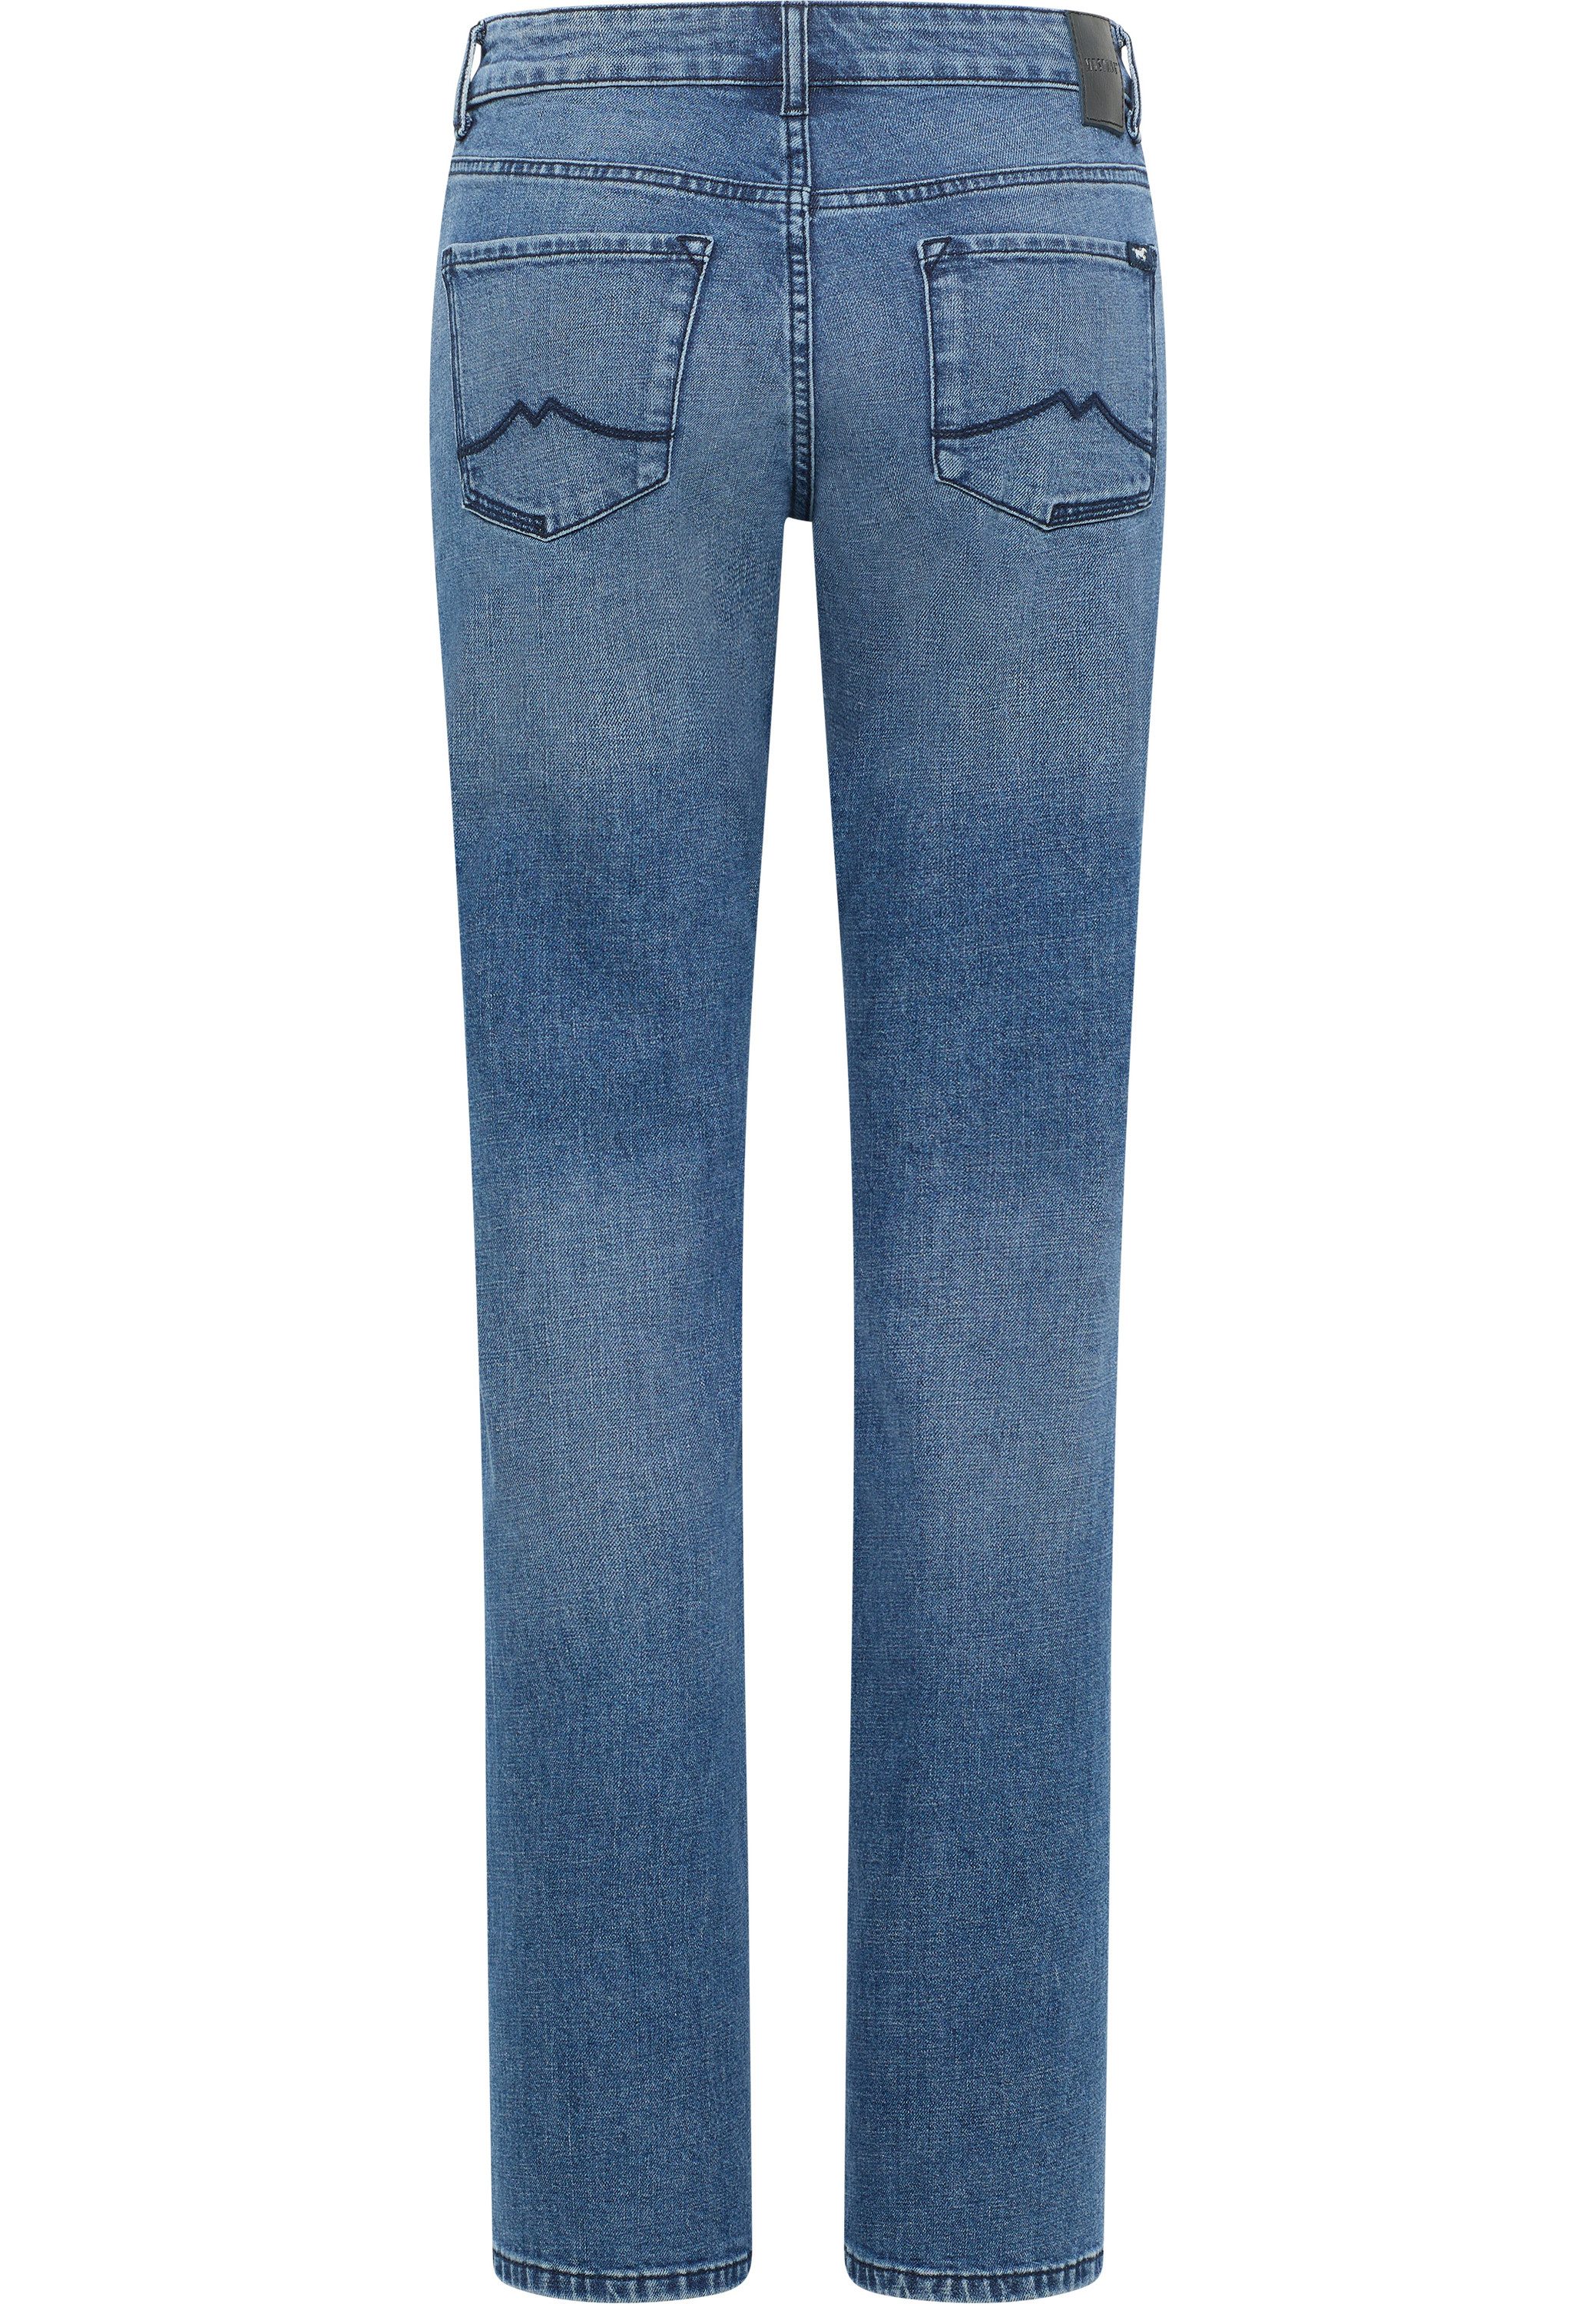 Mustang Straight jeans Style Crosby Relaxed Straight